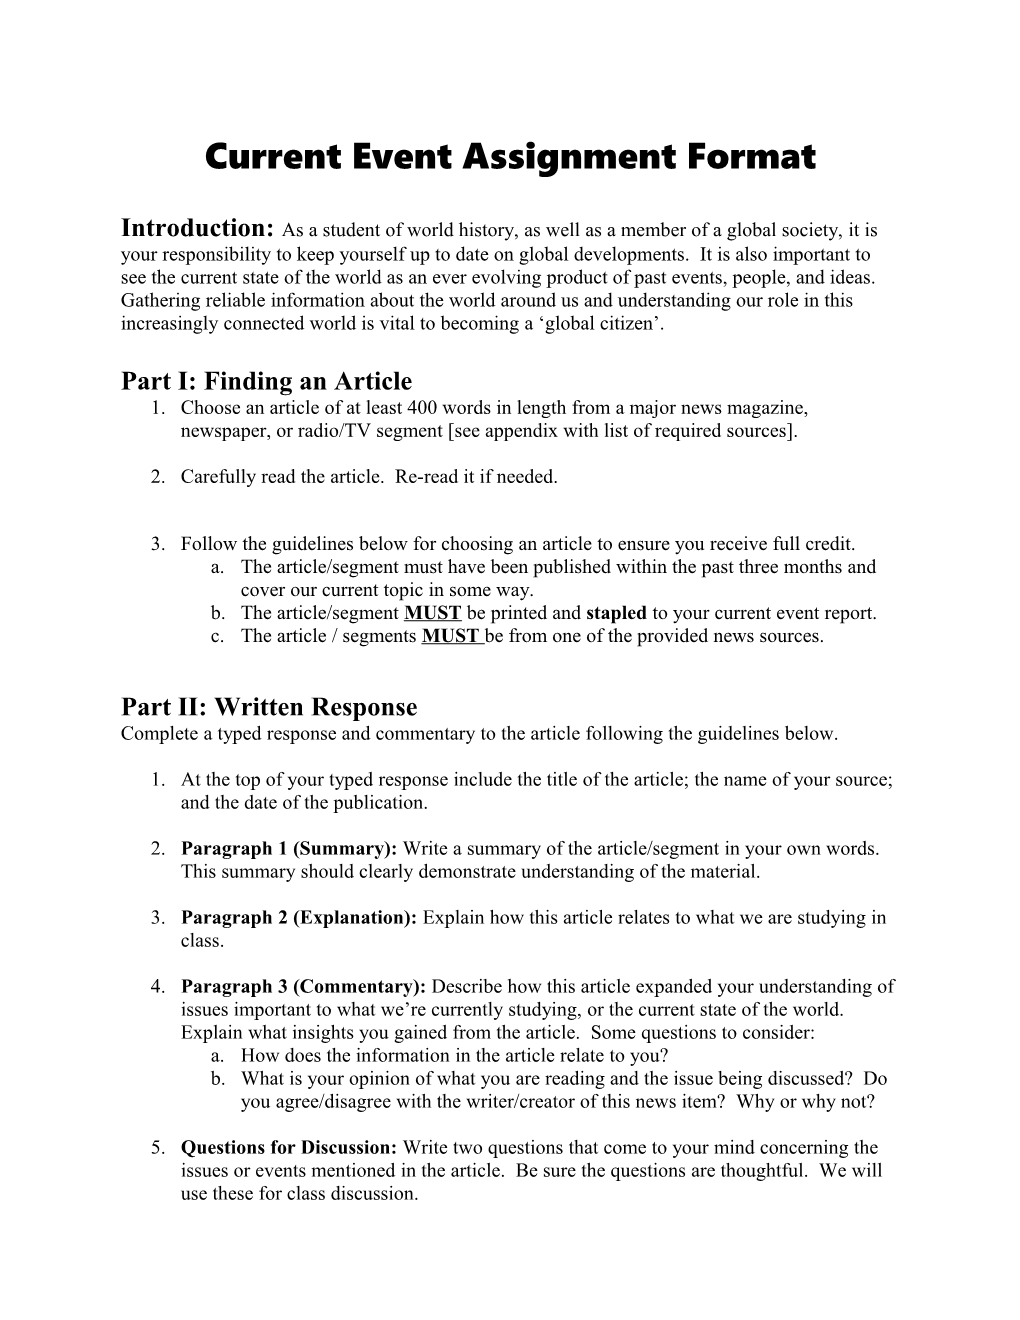 Current Event Assignment Format